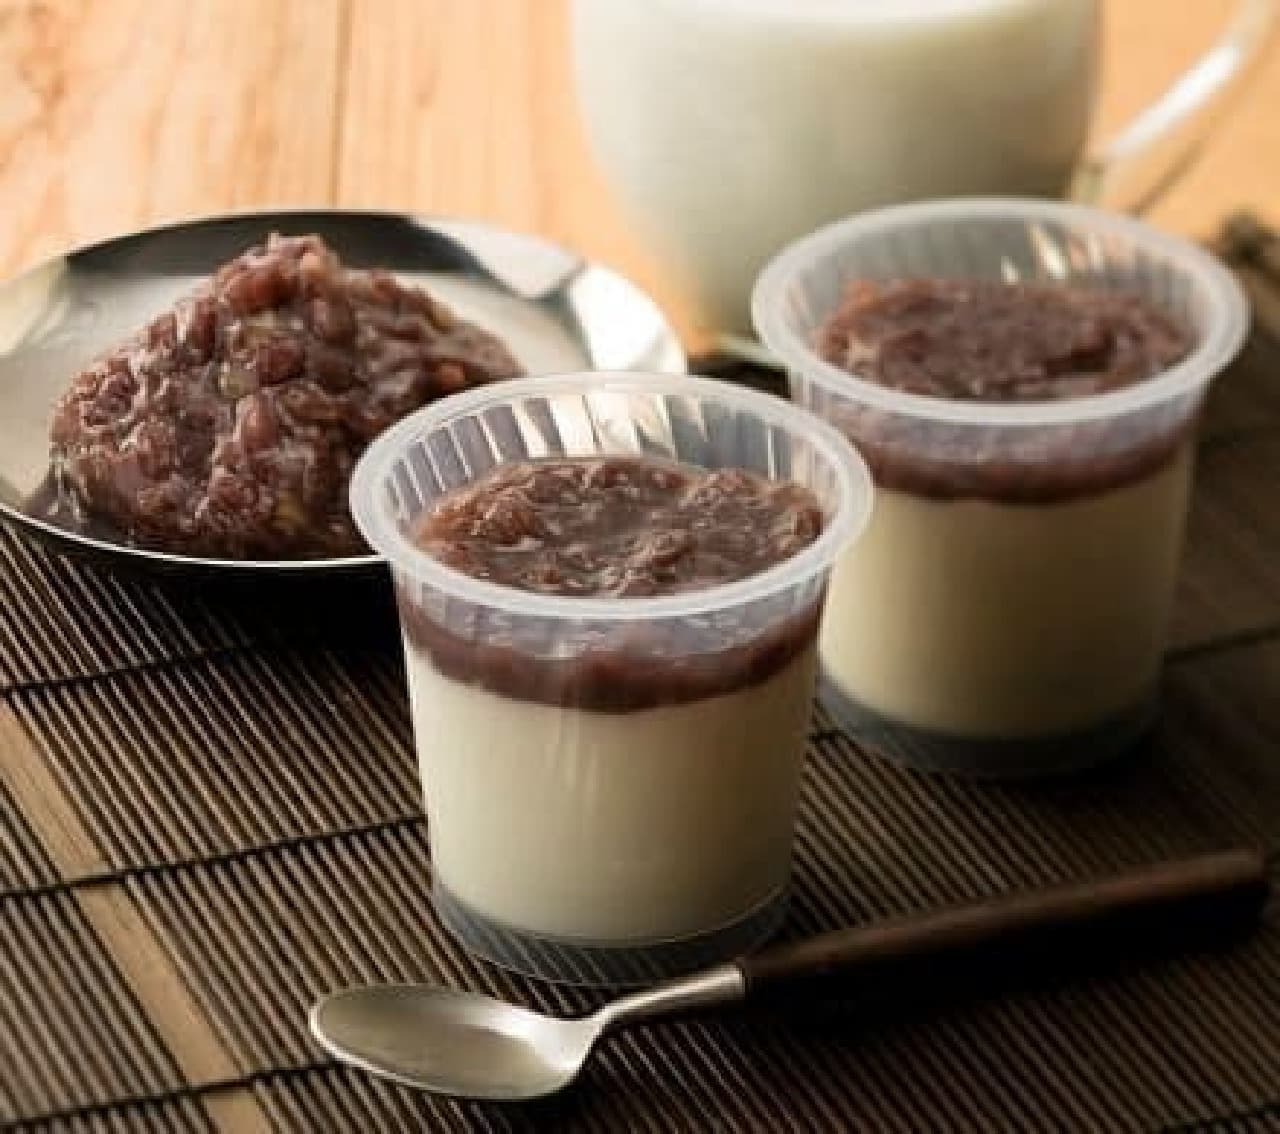 Chateraise "Milk pudding of red beans from Tokachi, Hokkaido"